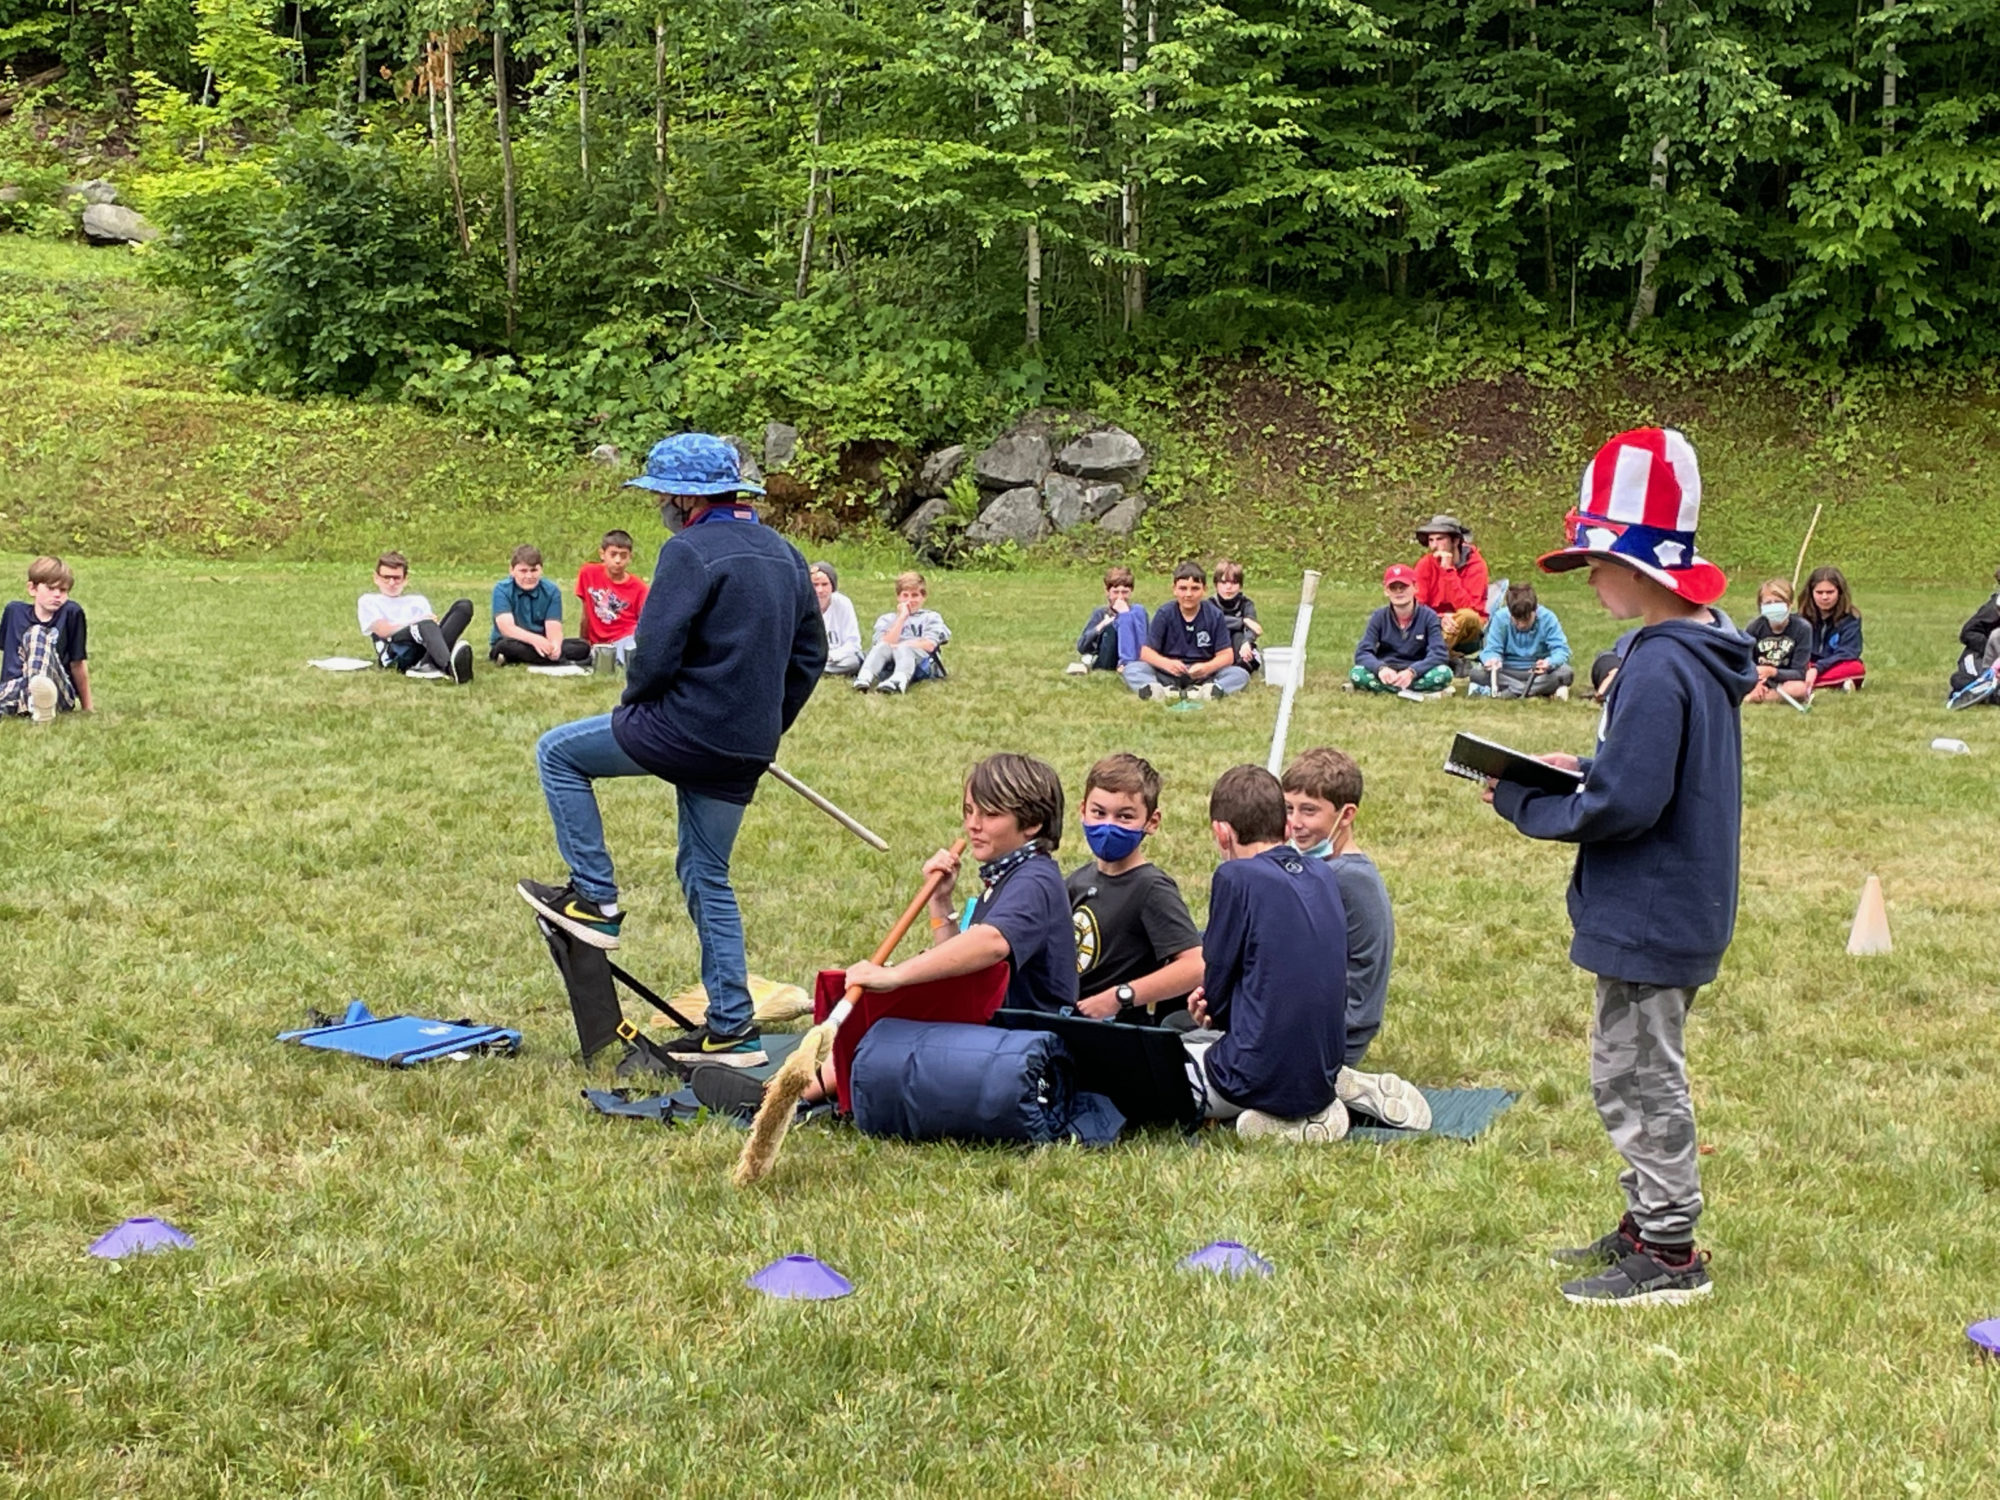 Pemi campers put on a 4th of July skit